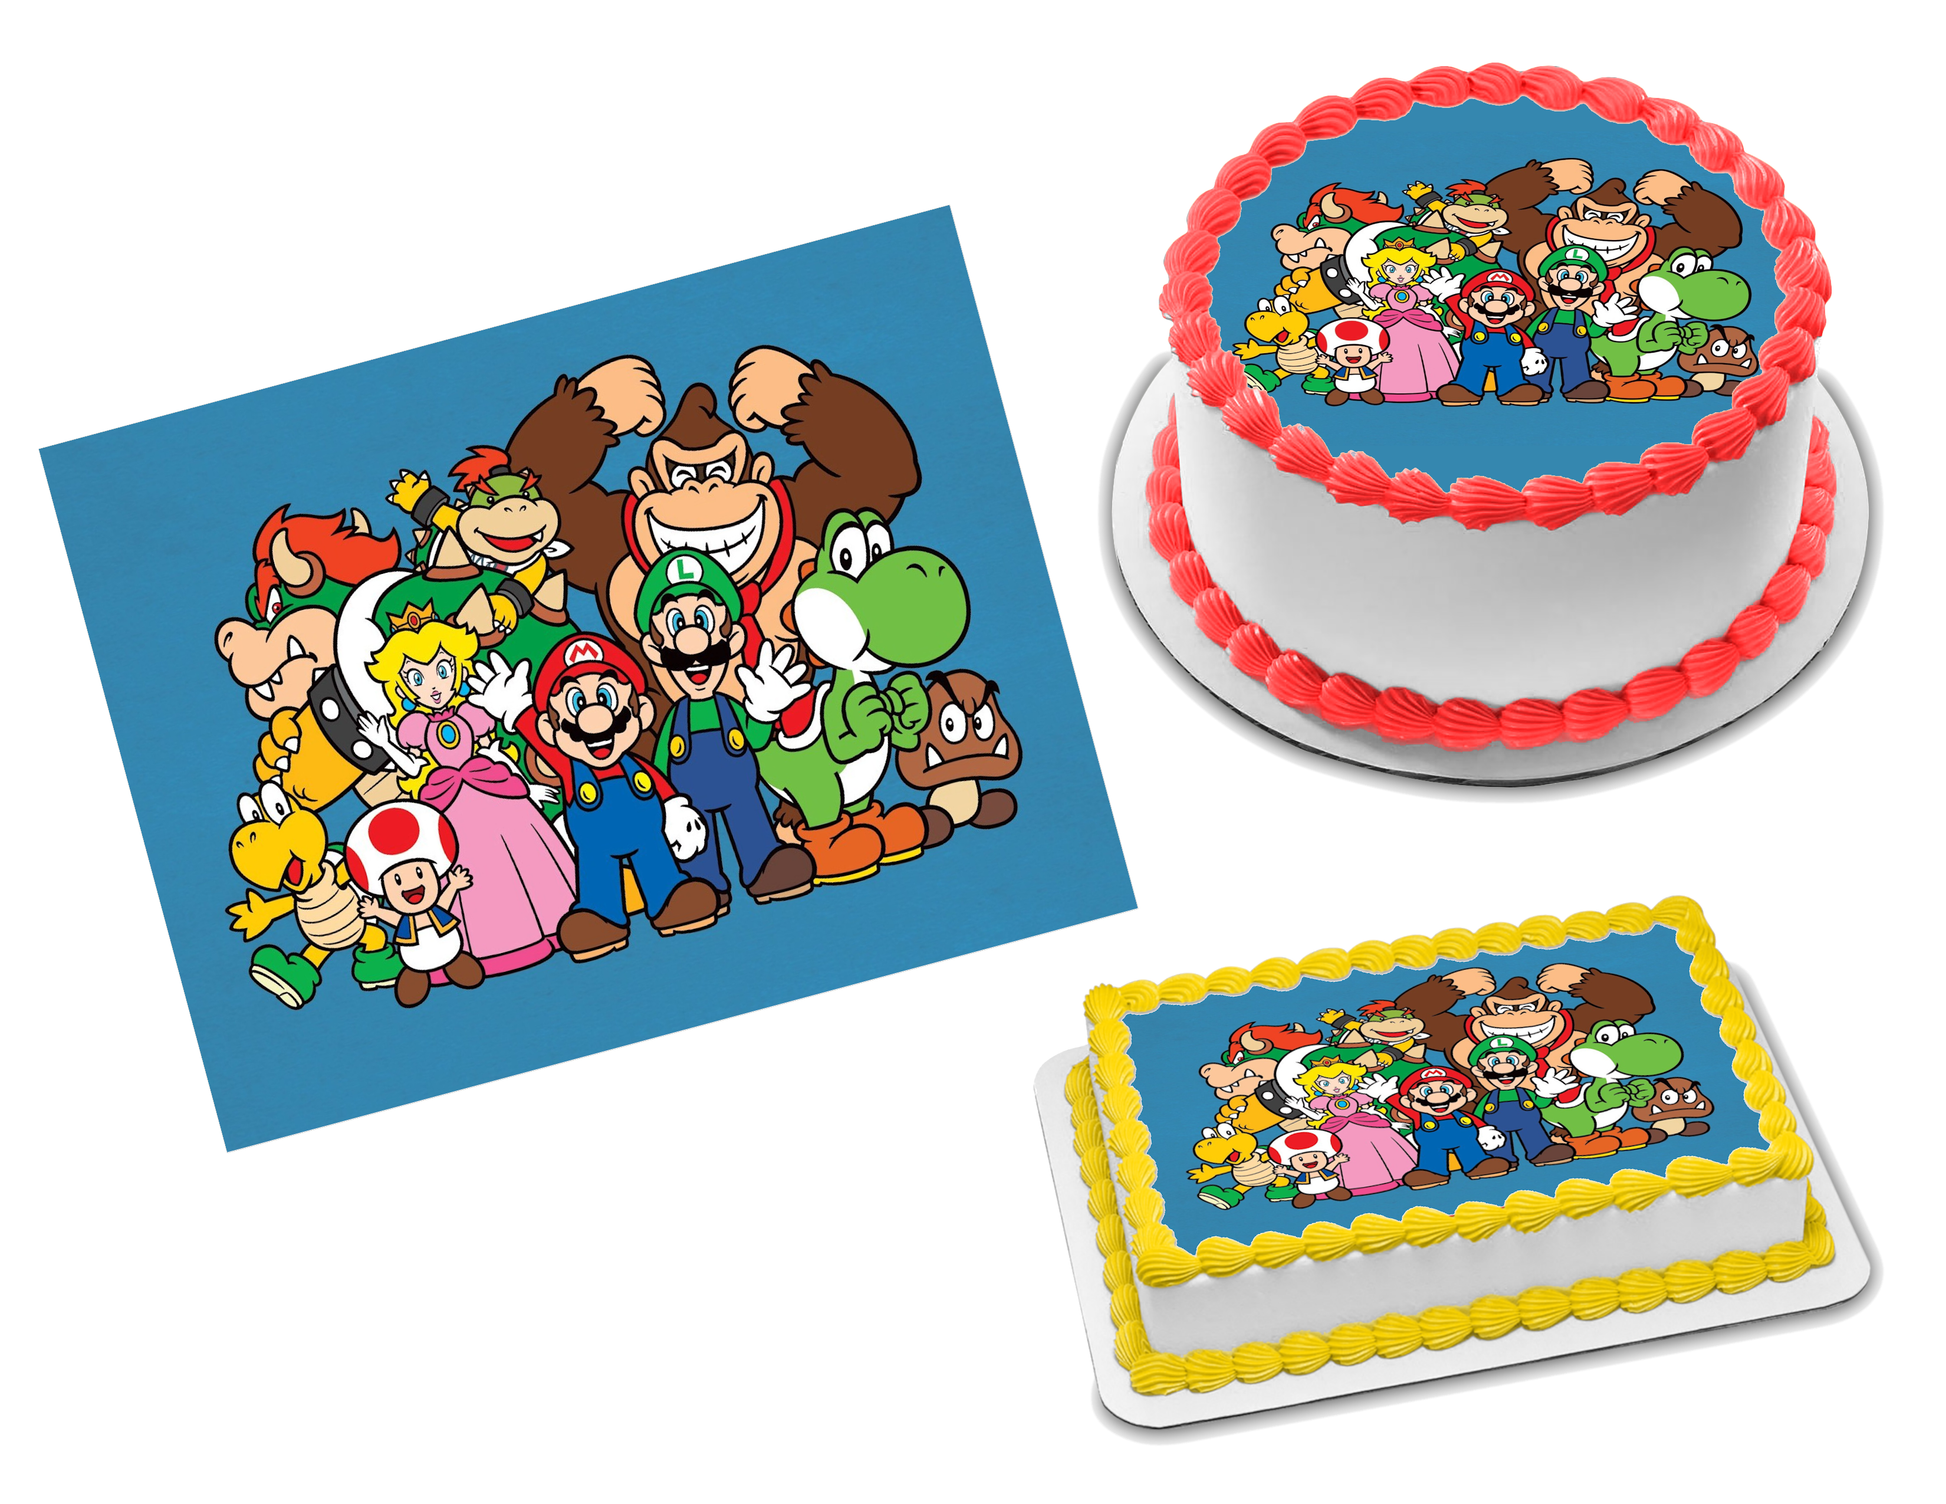 New Super Mario Bros 2 Birthday Cake topper Edible Icing Image paper sheet  easy